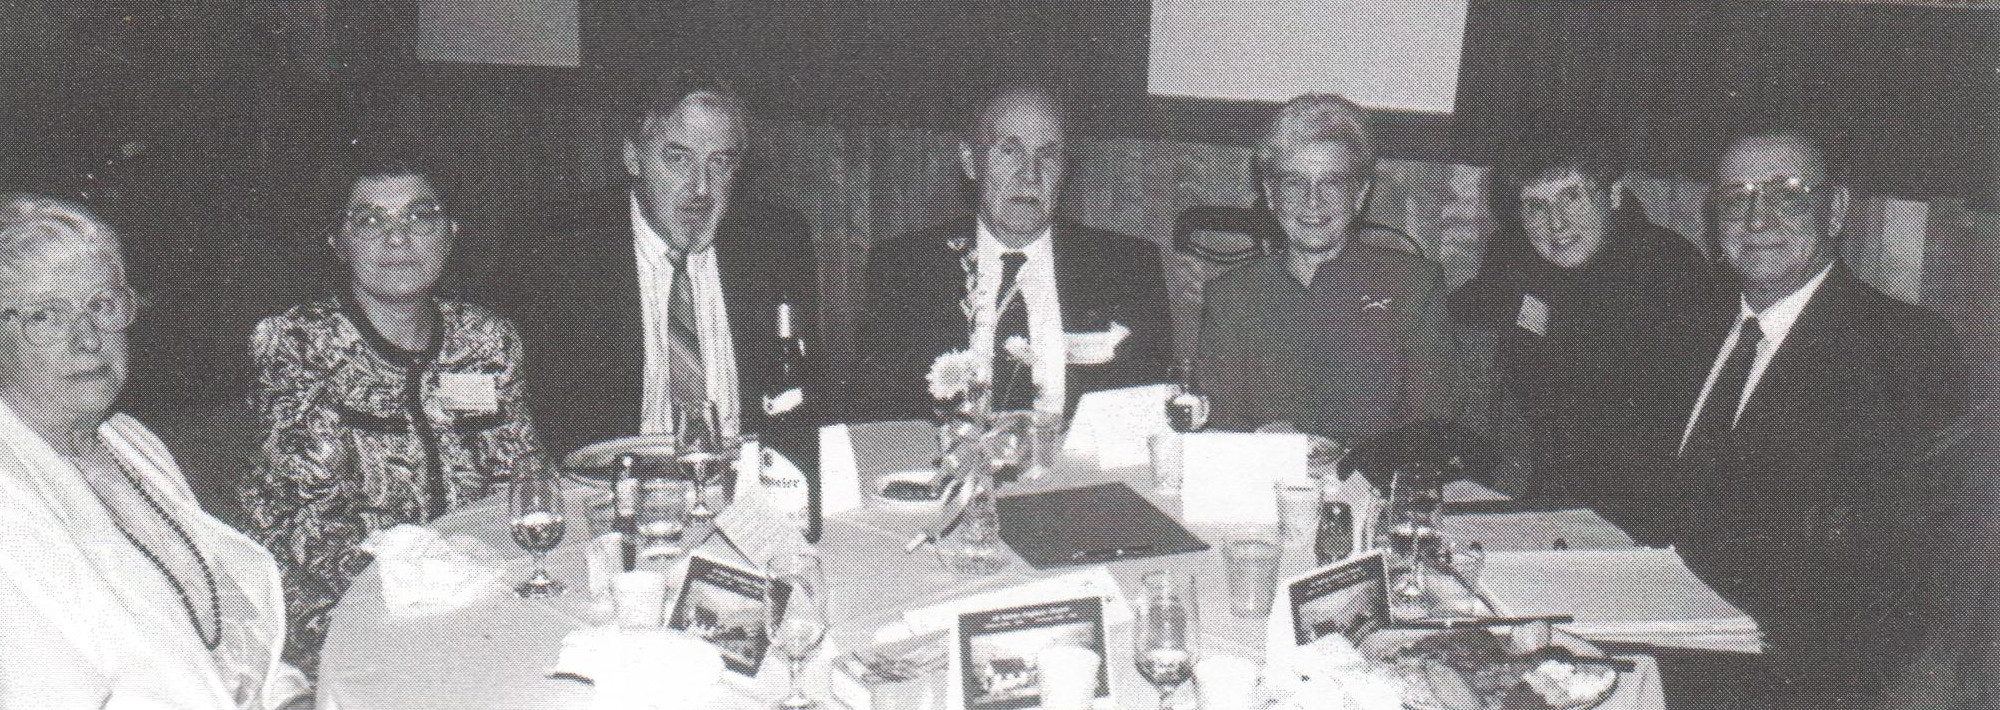 Pauline Murray, Margaret and Peter Hunziker, Jim Kerfoot, Robin Harvie, and Jean and Leigh Blackwell shared at able at the Centennial Anniversary banquet in 1992.